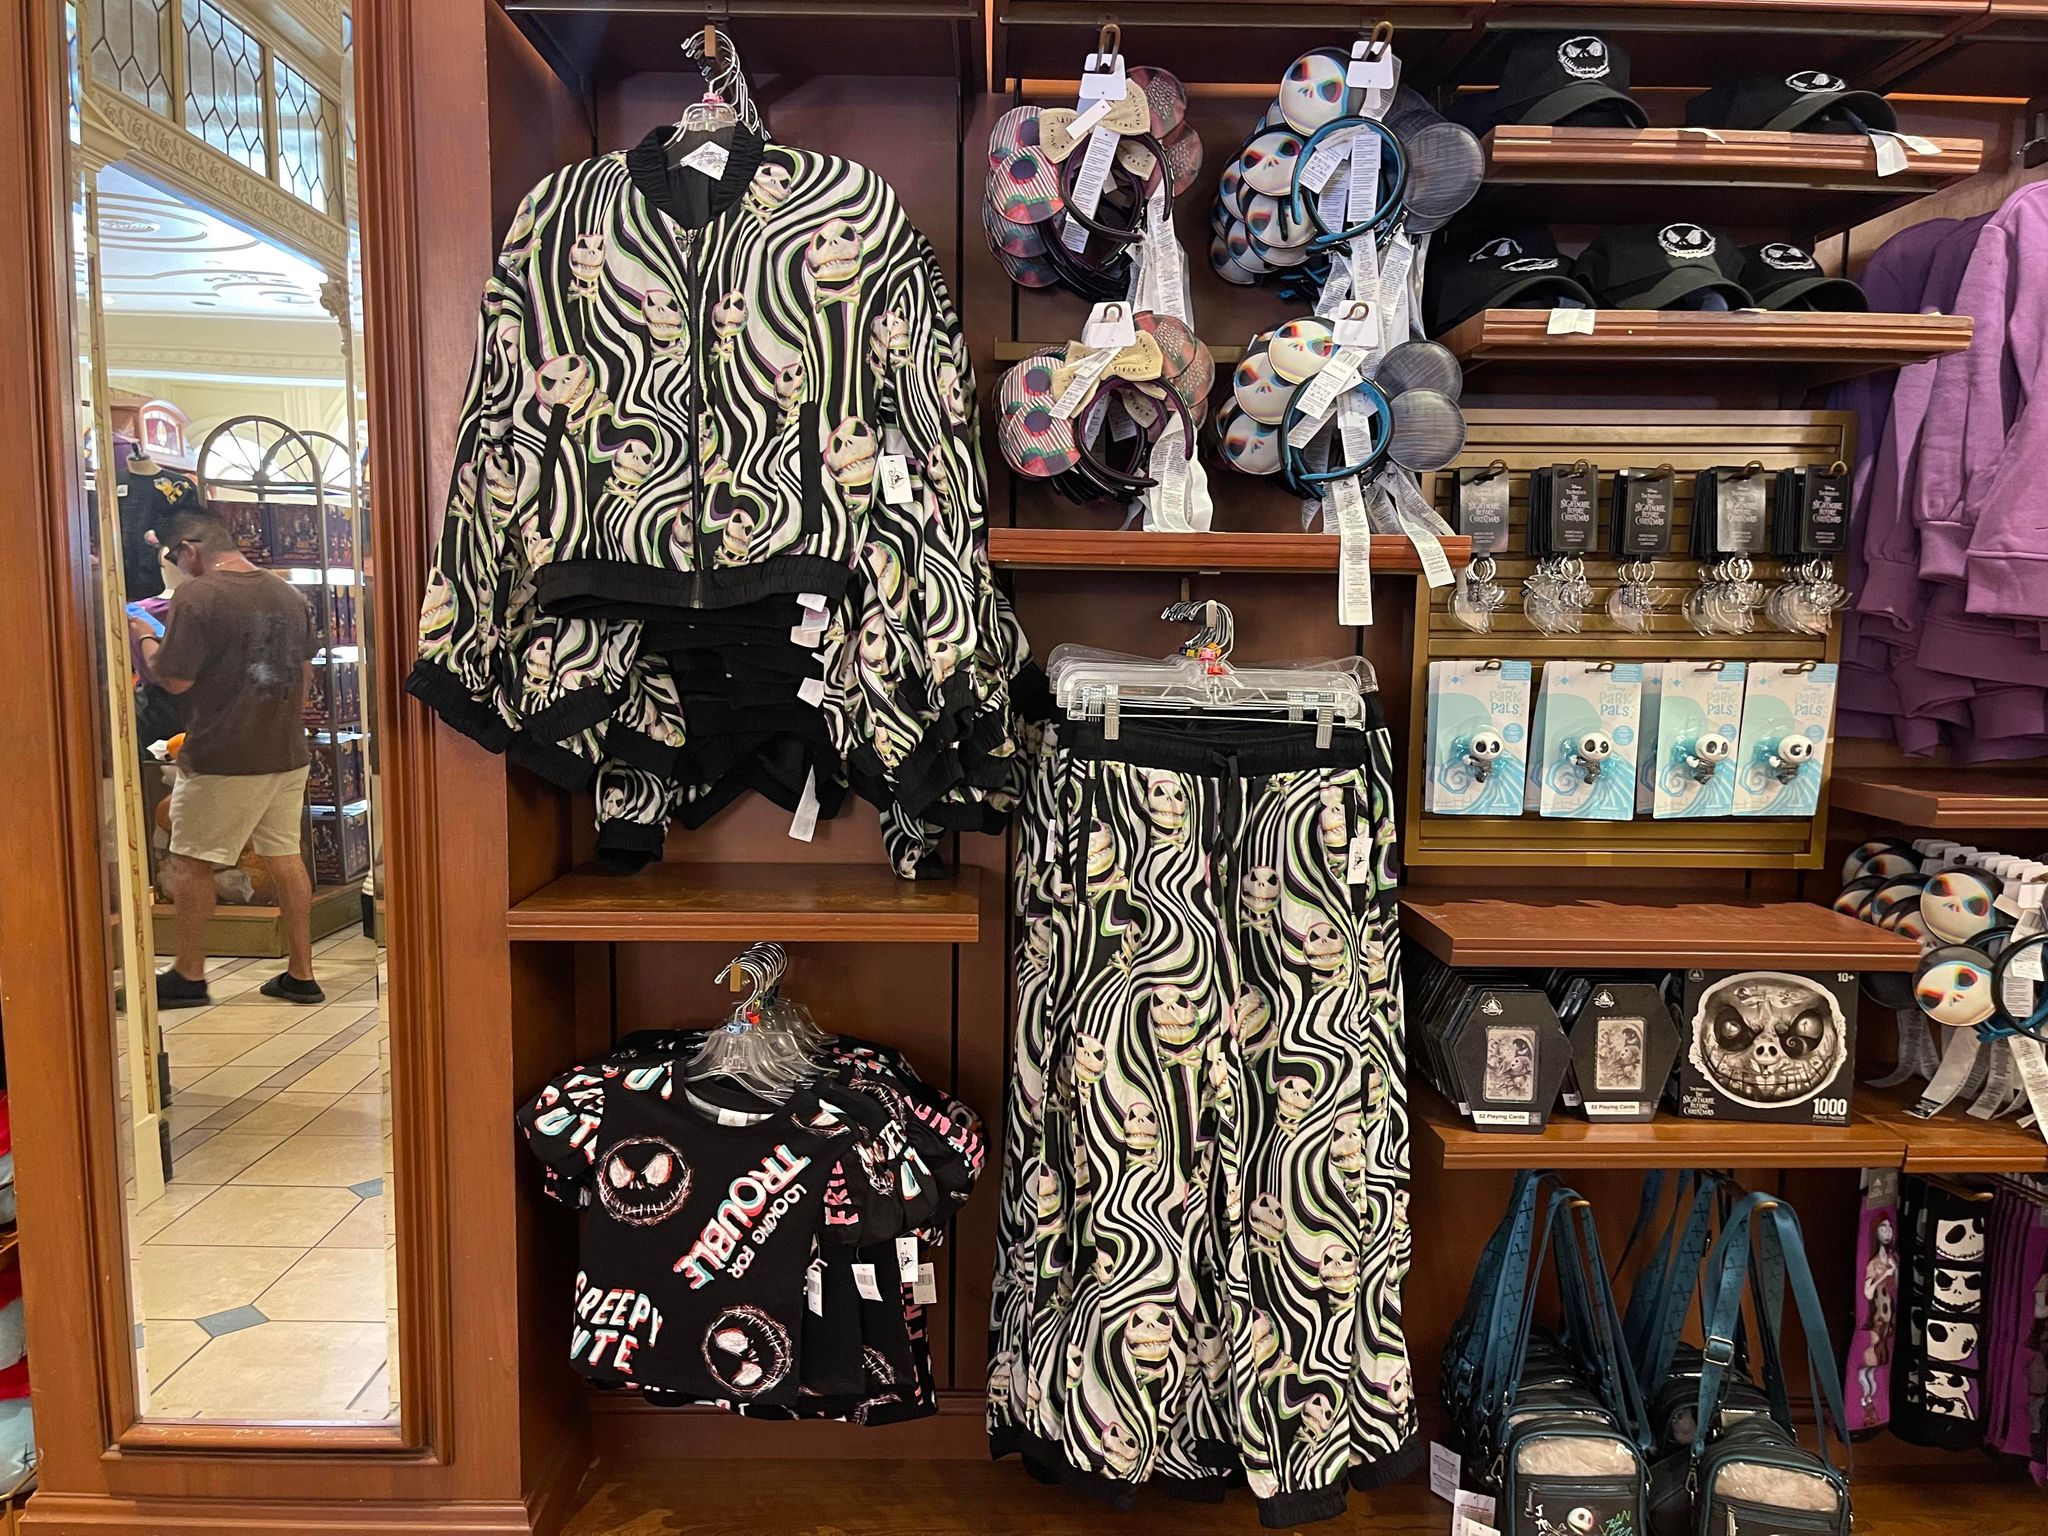 New Nightmare Before Christmas Collection Now At Emporium In Walt Disney World Mickeyblog Com